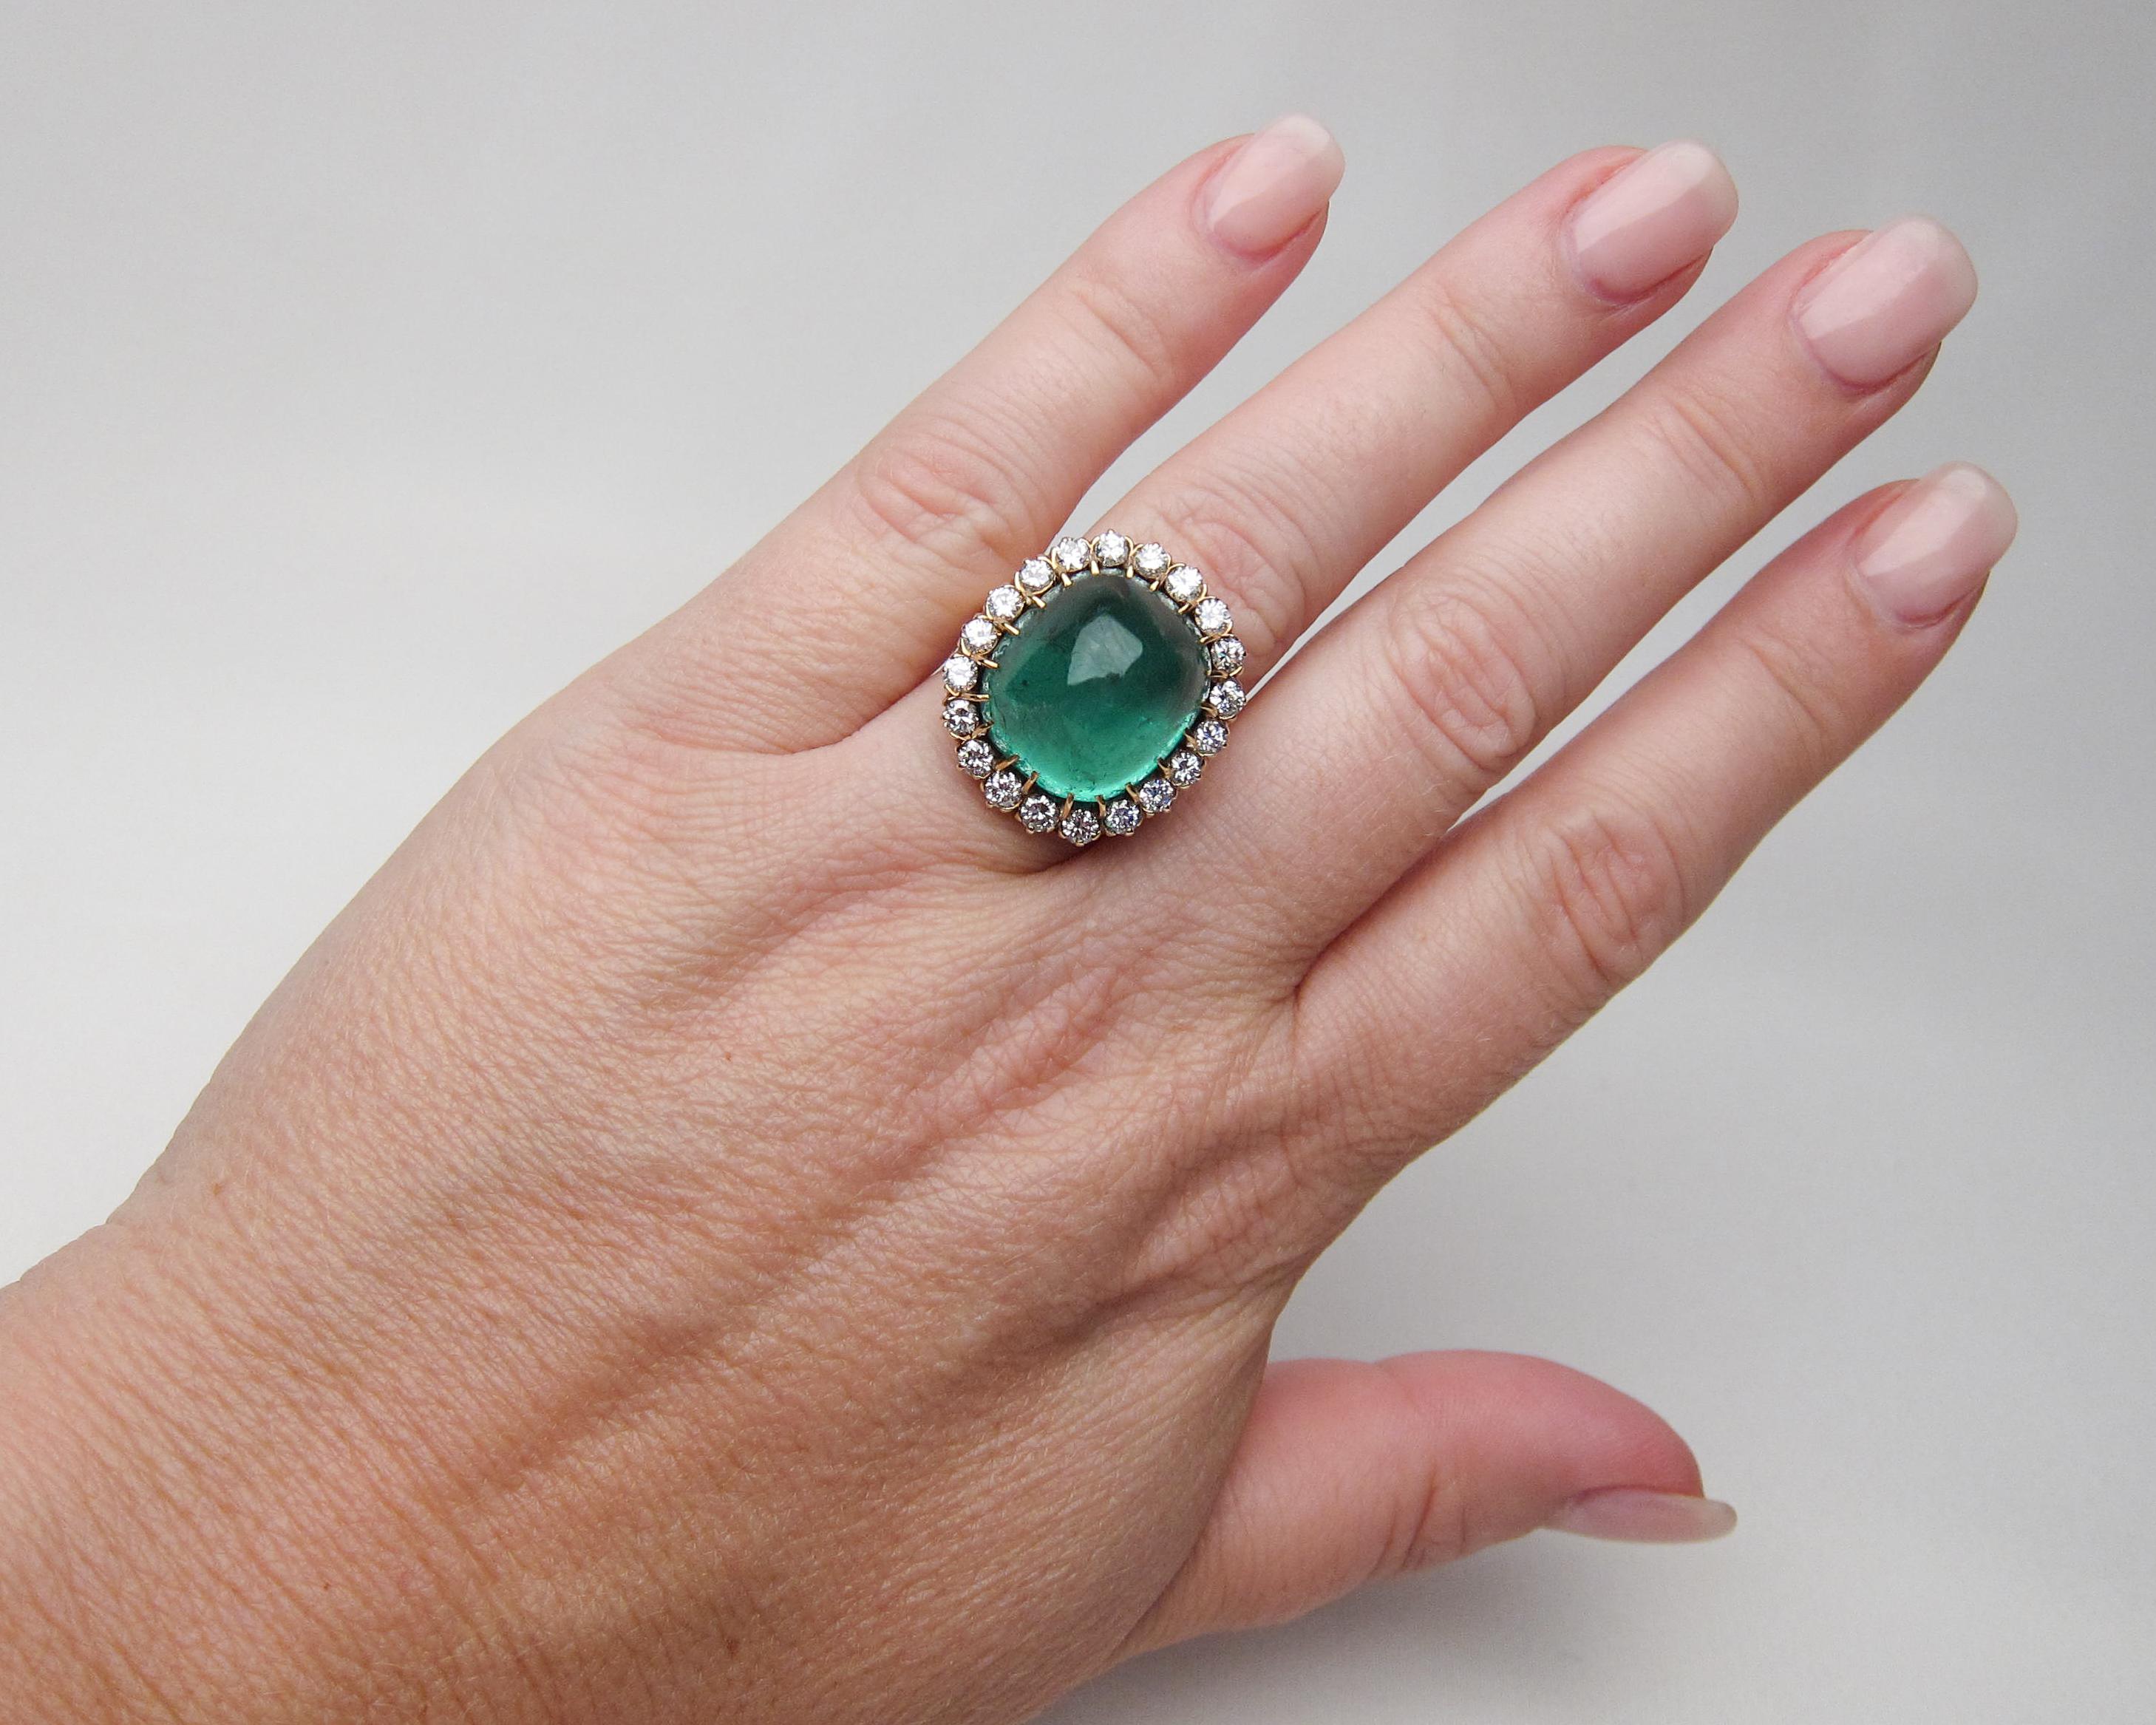 14K Gold 1.60 Ct Diamond and 27.60 Ct Emerald Cabochon Cocktail Ring, Circa 1940 For Sale 3